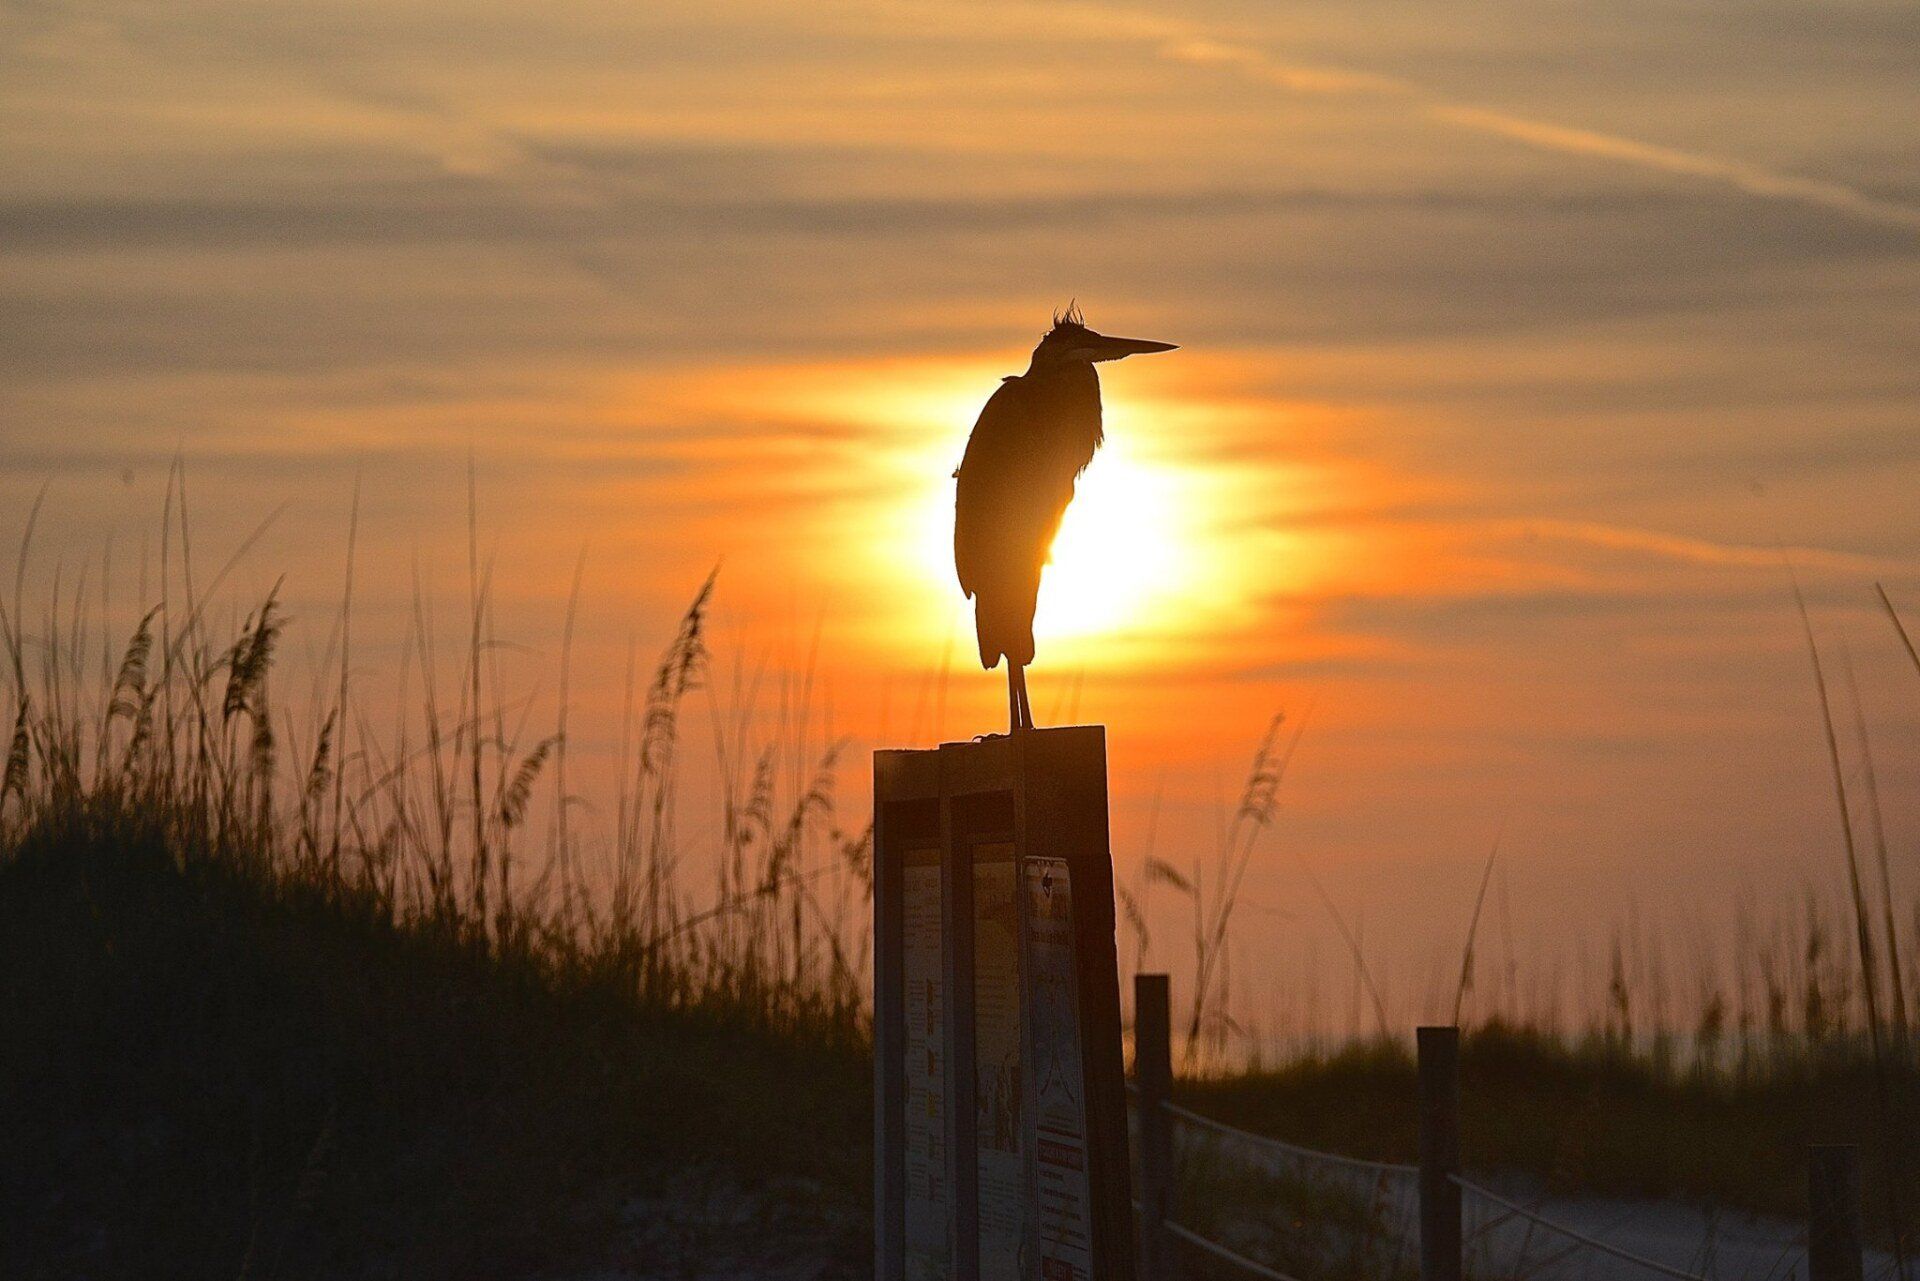 Orange Beach, Alabama, is getting $386,000 from the Audubon Society for a shorebird education project..